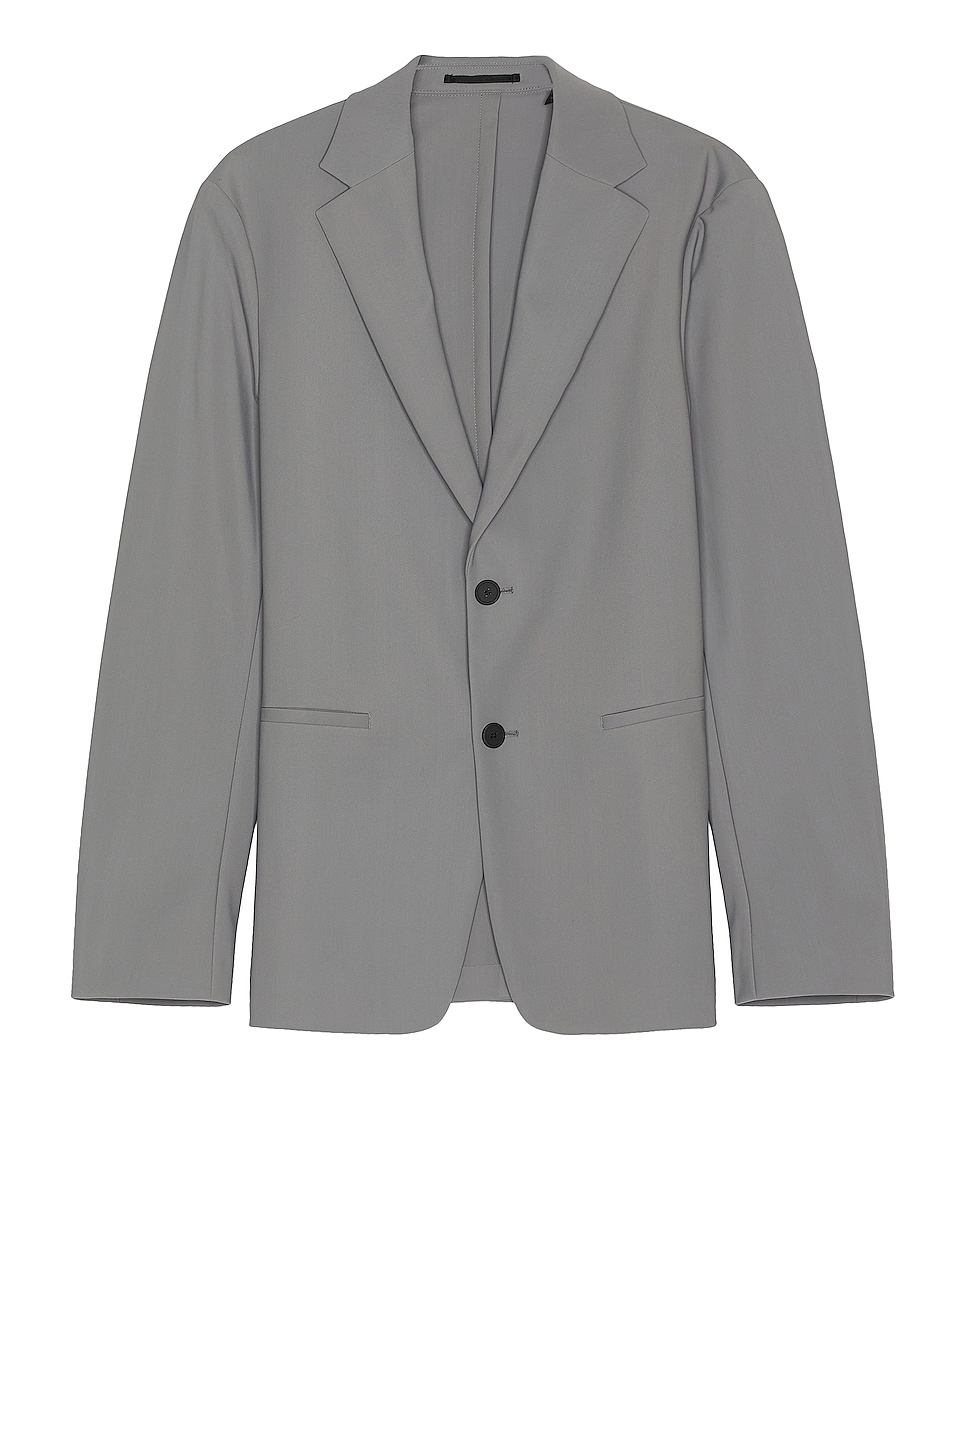 Image 1 of Theory Clinton Jacket in Stone